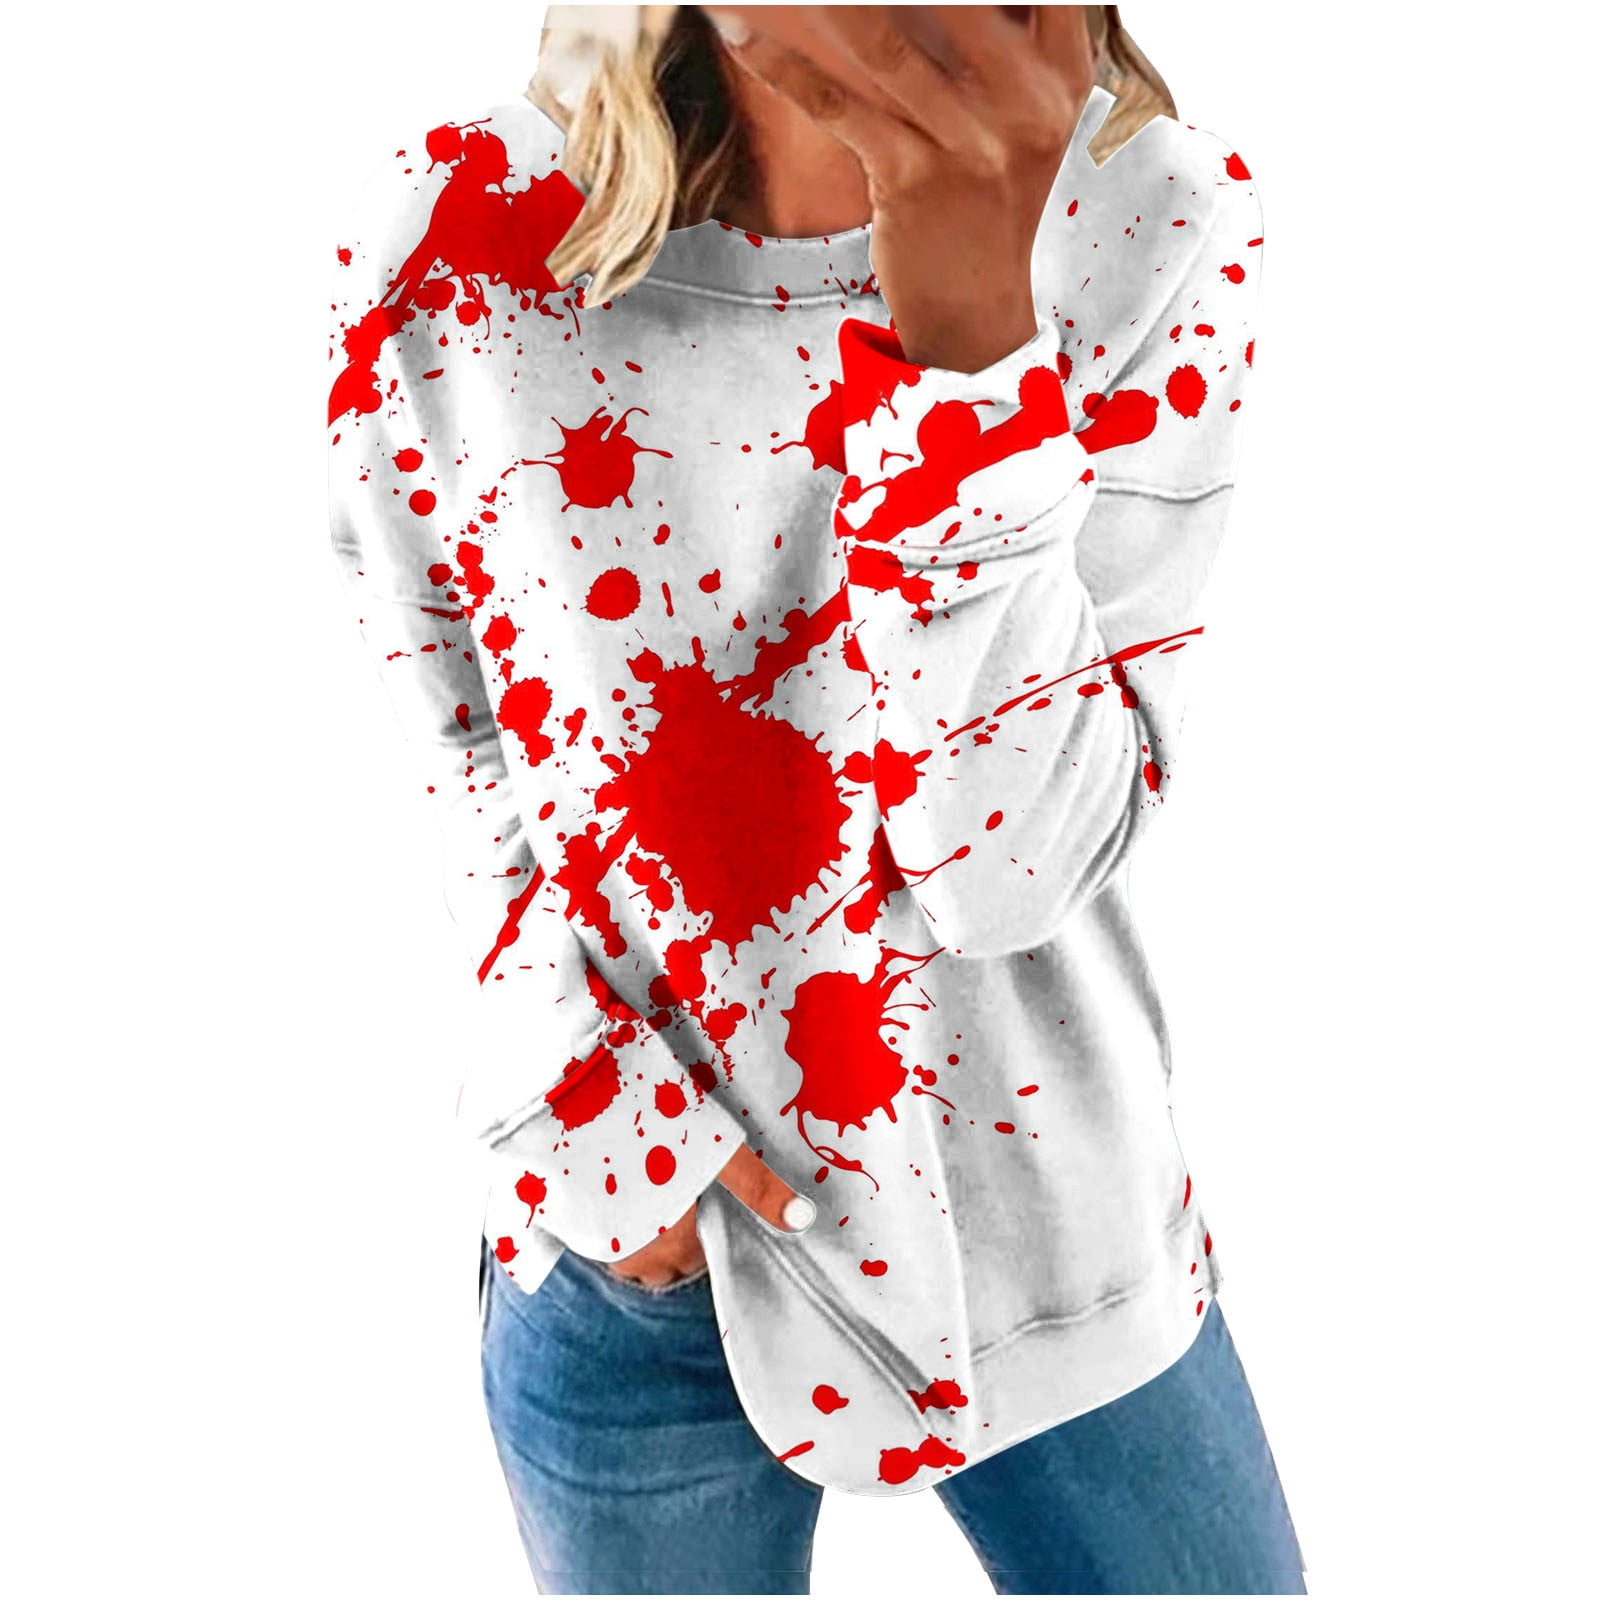 Penkiiy Womens Tops Women's Fashion Printed Loose T-shirt Long Sleeves  Blouse Round Neck Casual Tops Sweatshirt Hoodies White Y2K Clothes